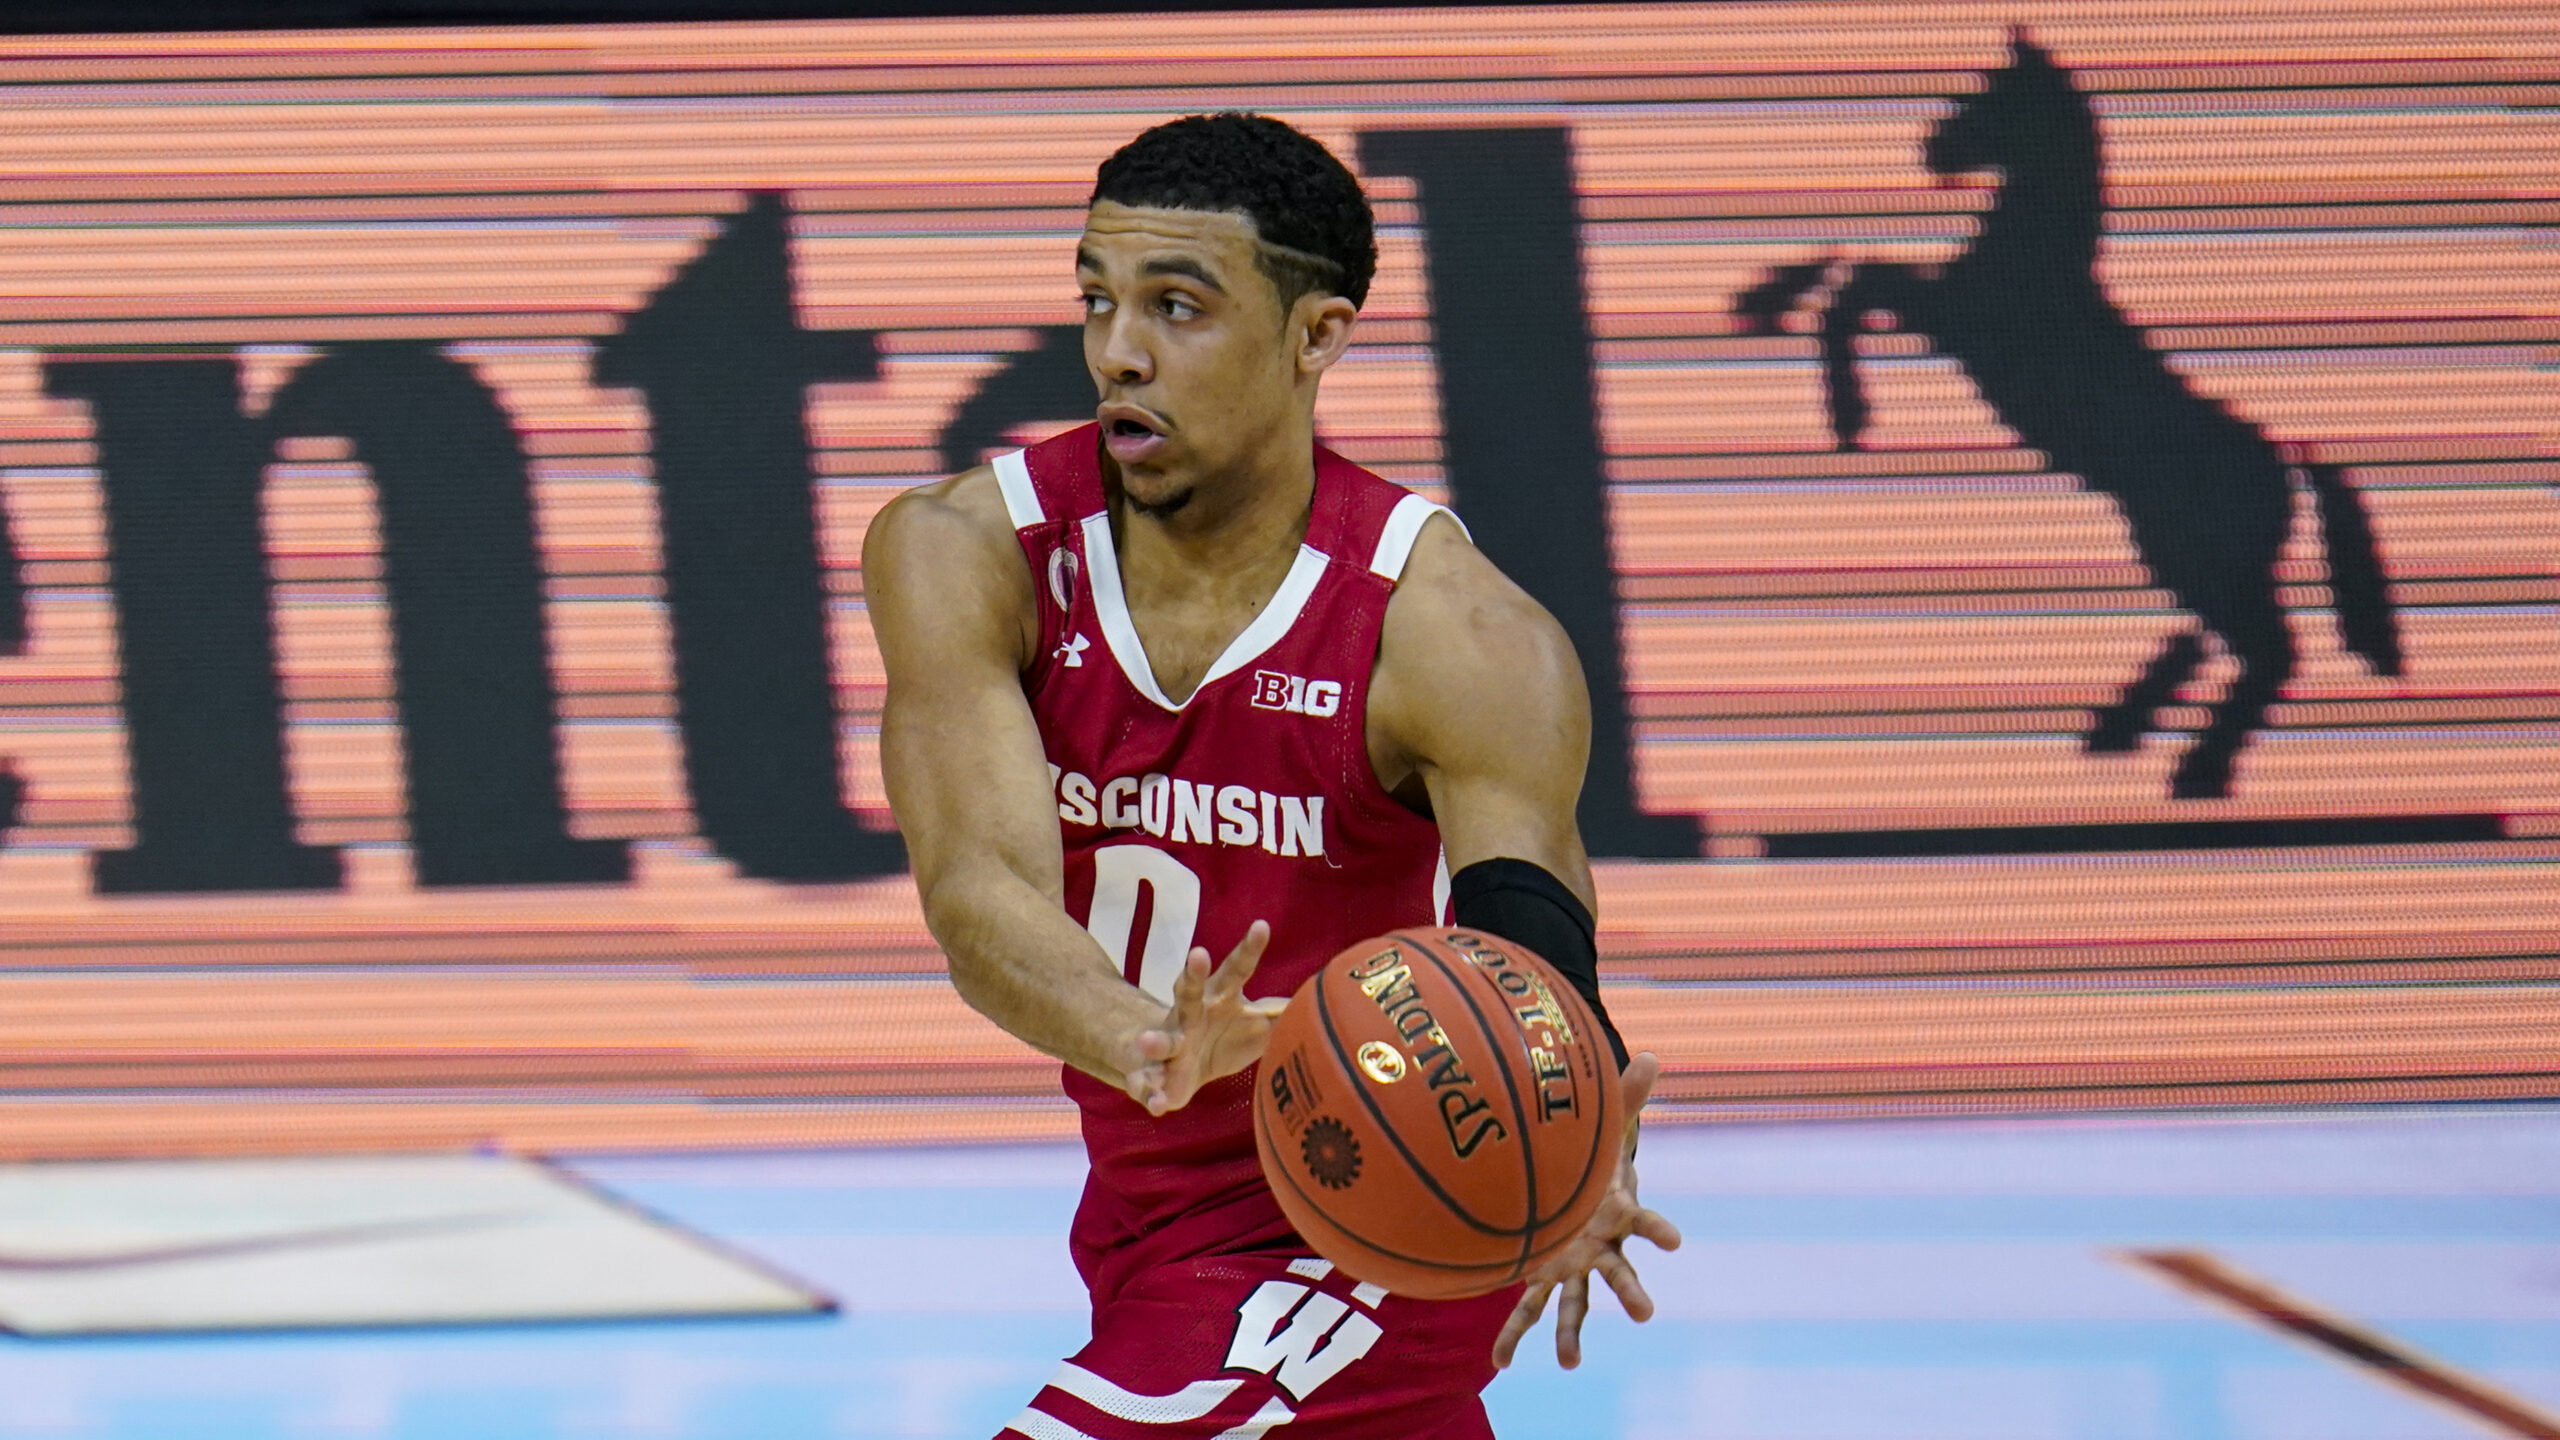 March Madness: No. 9 Seed Badgers Prepare To Face Tar Heels Friday